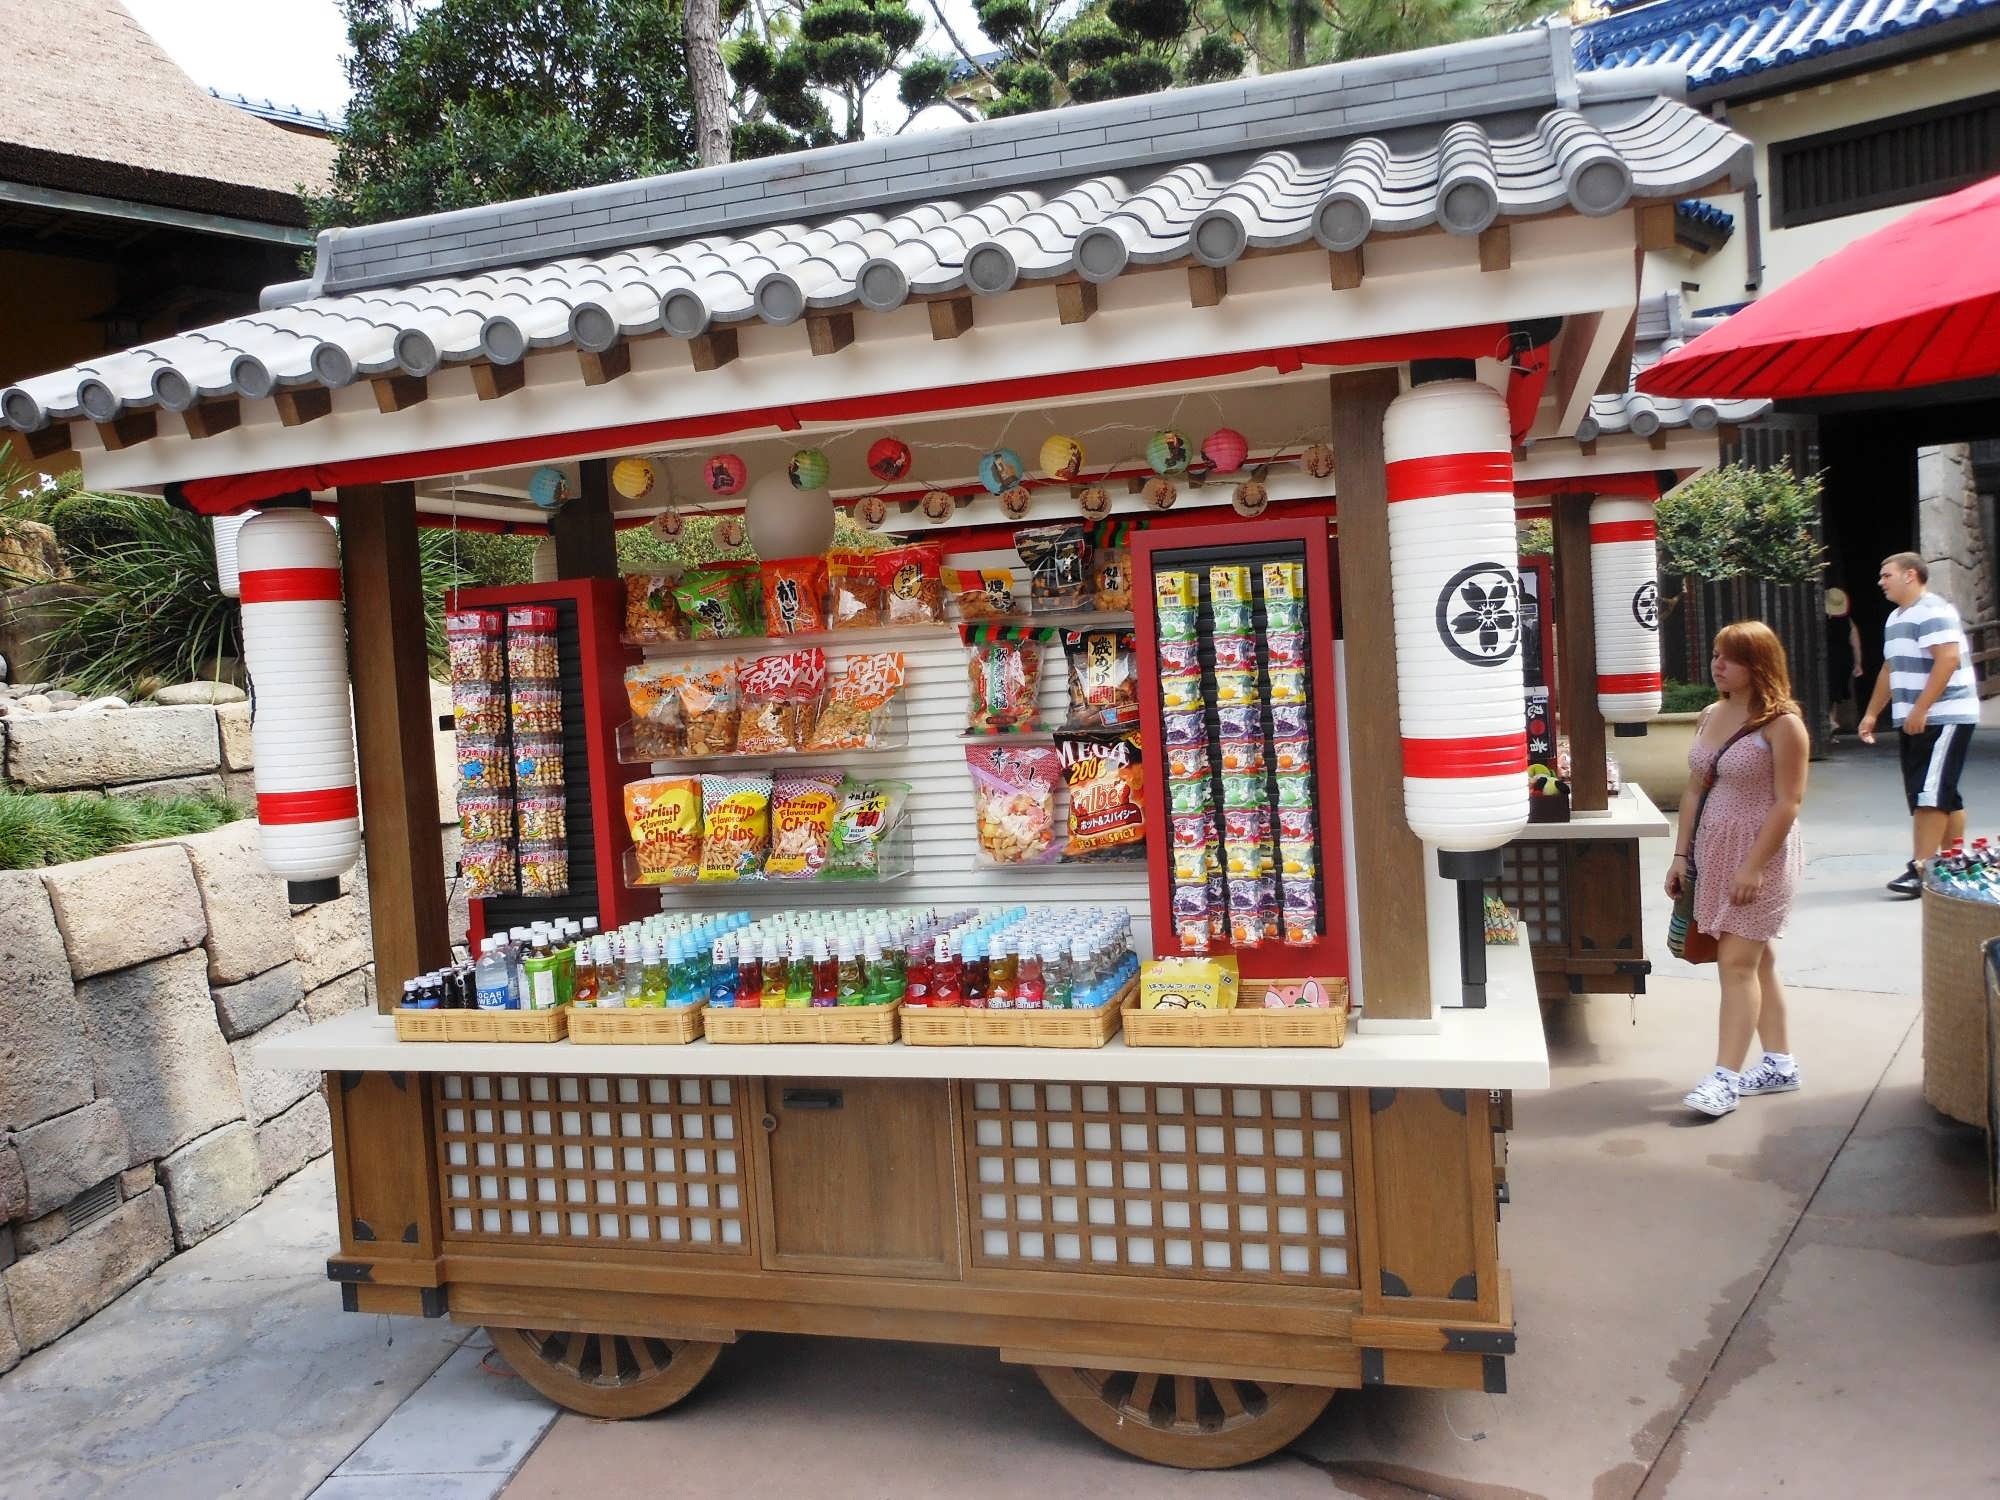 Epcot's Japan Pavilion: Through the torii gate and into a land of food